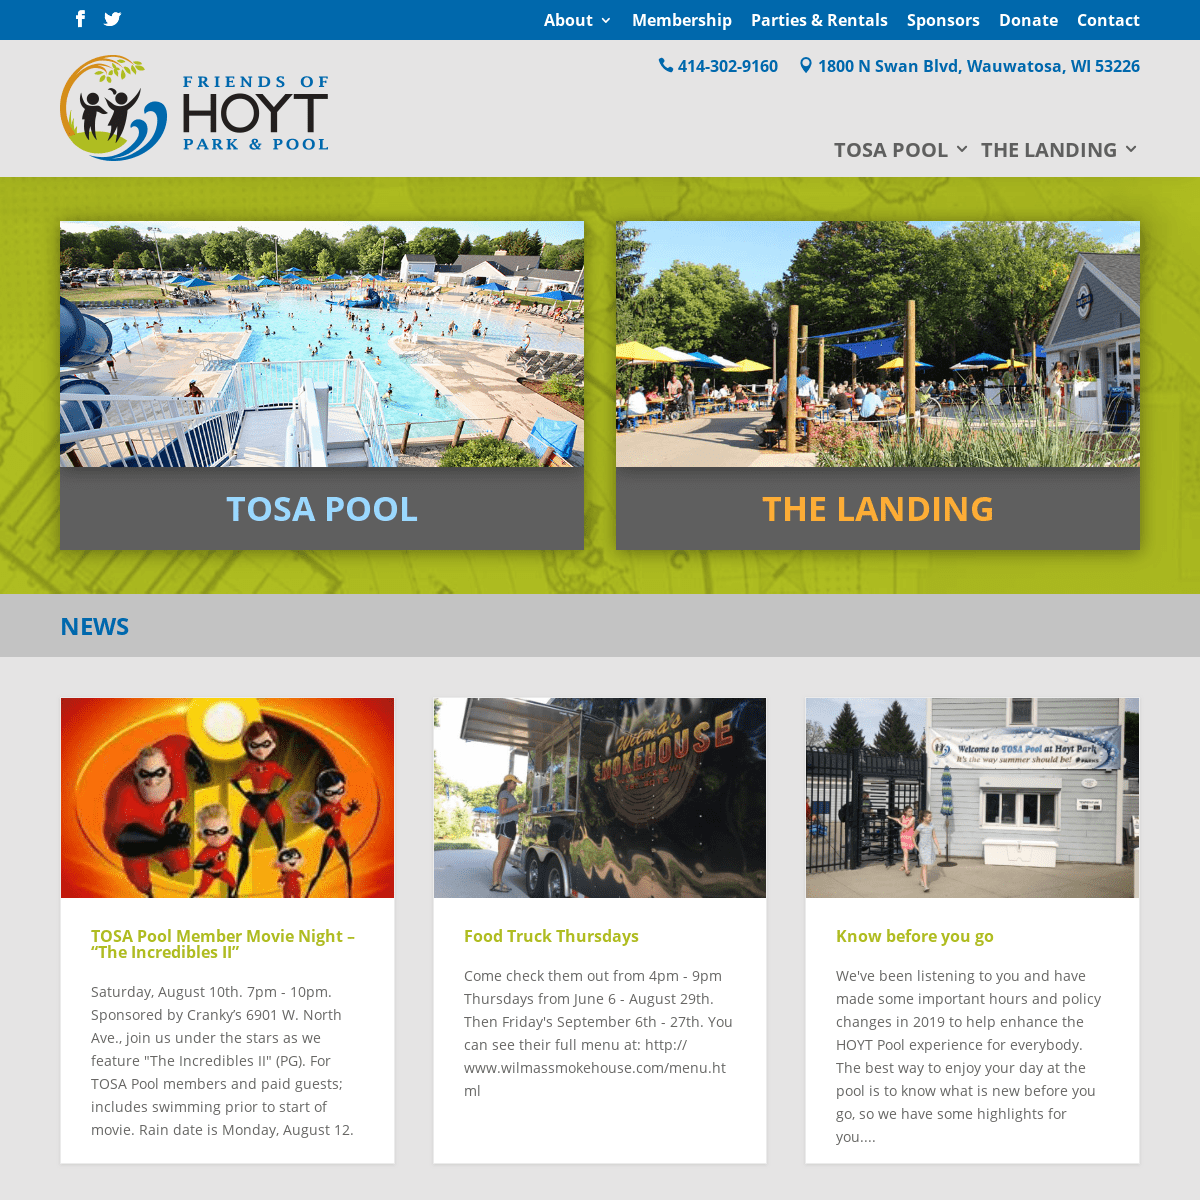 Friends of Hoyt Park & Pool | IT’S THE WAY SUMMER  SHOULD BE!